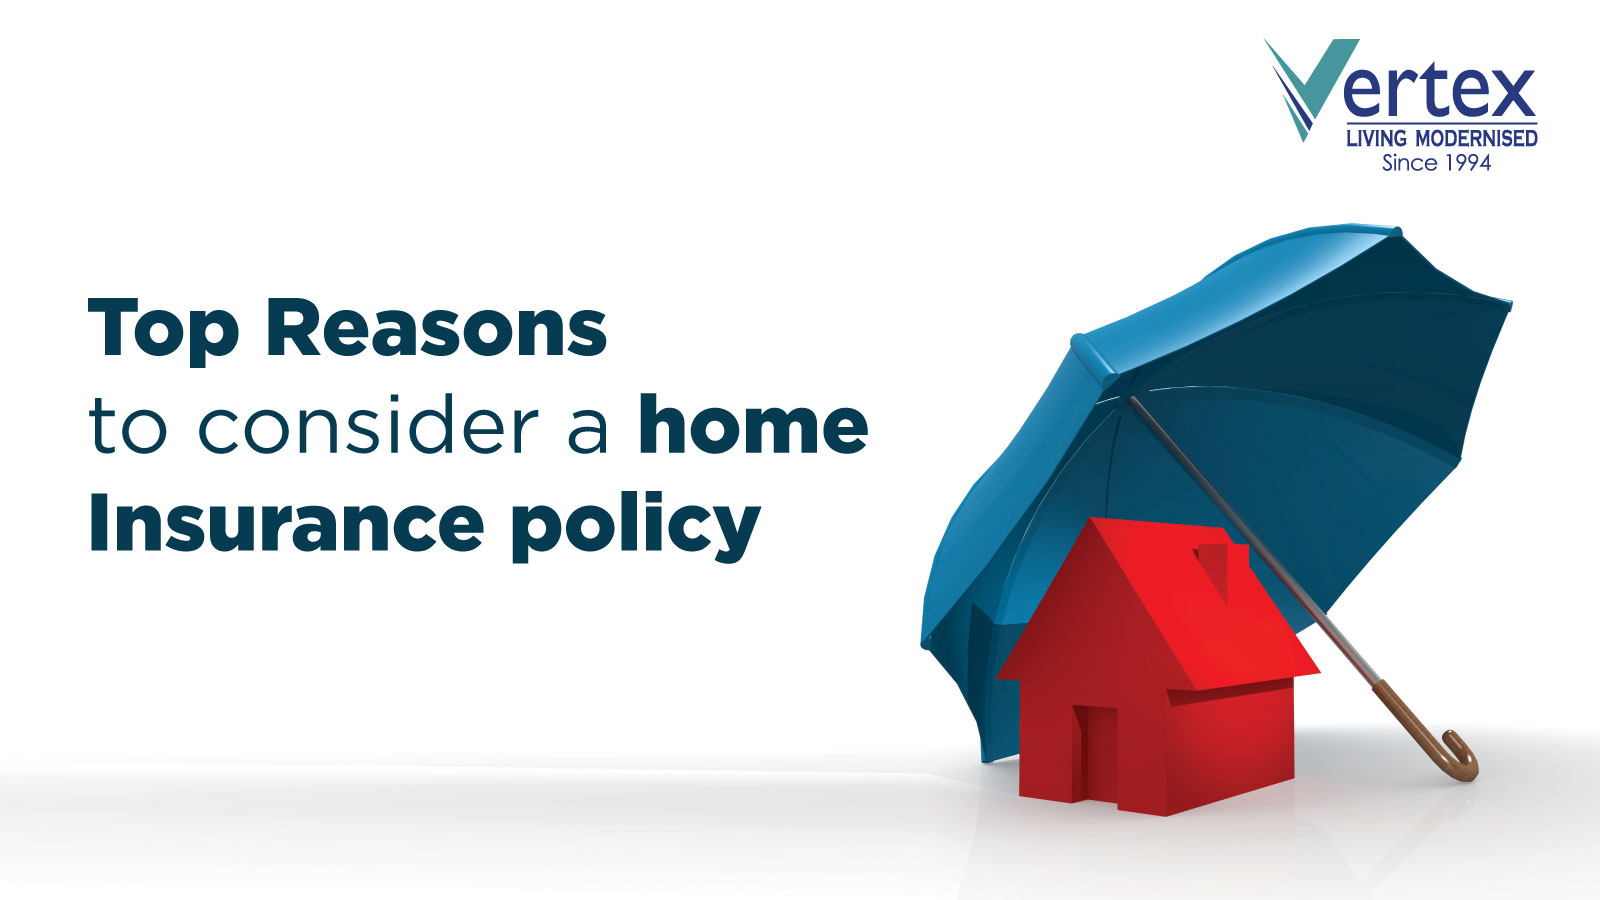 Home insurance policy reasons